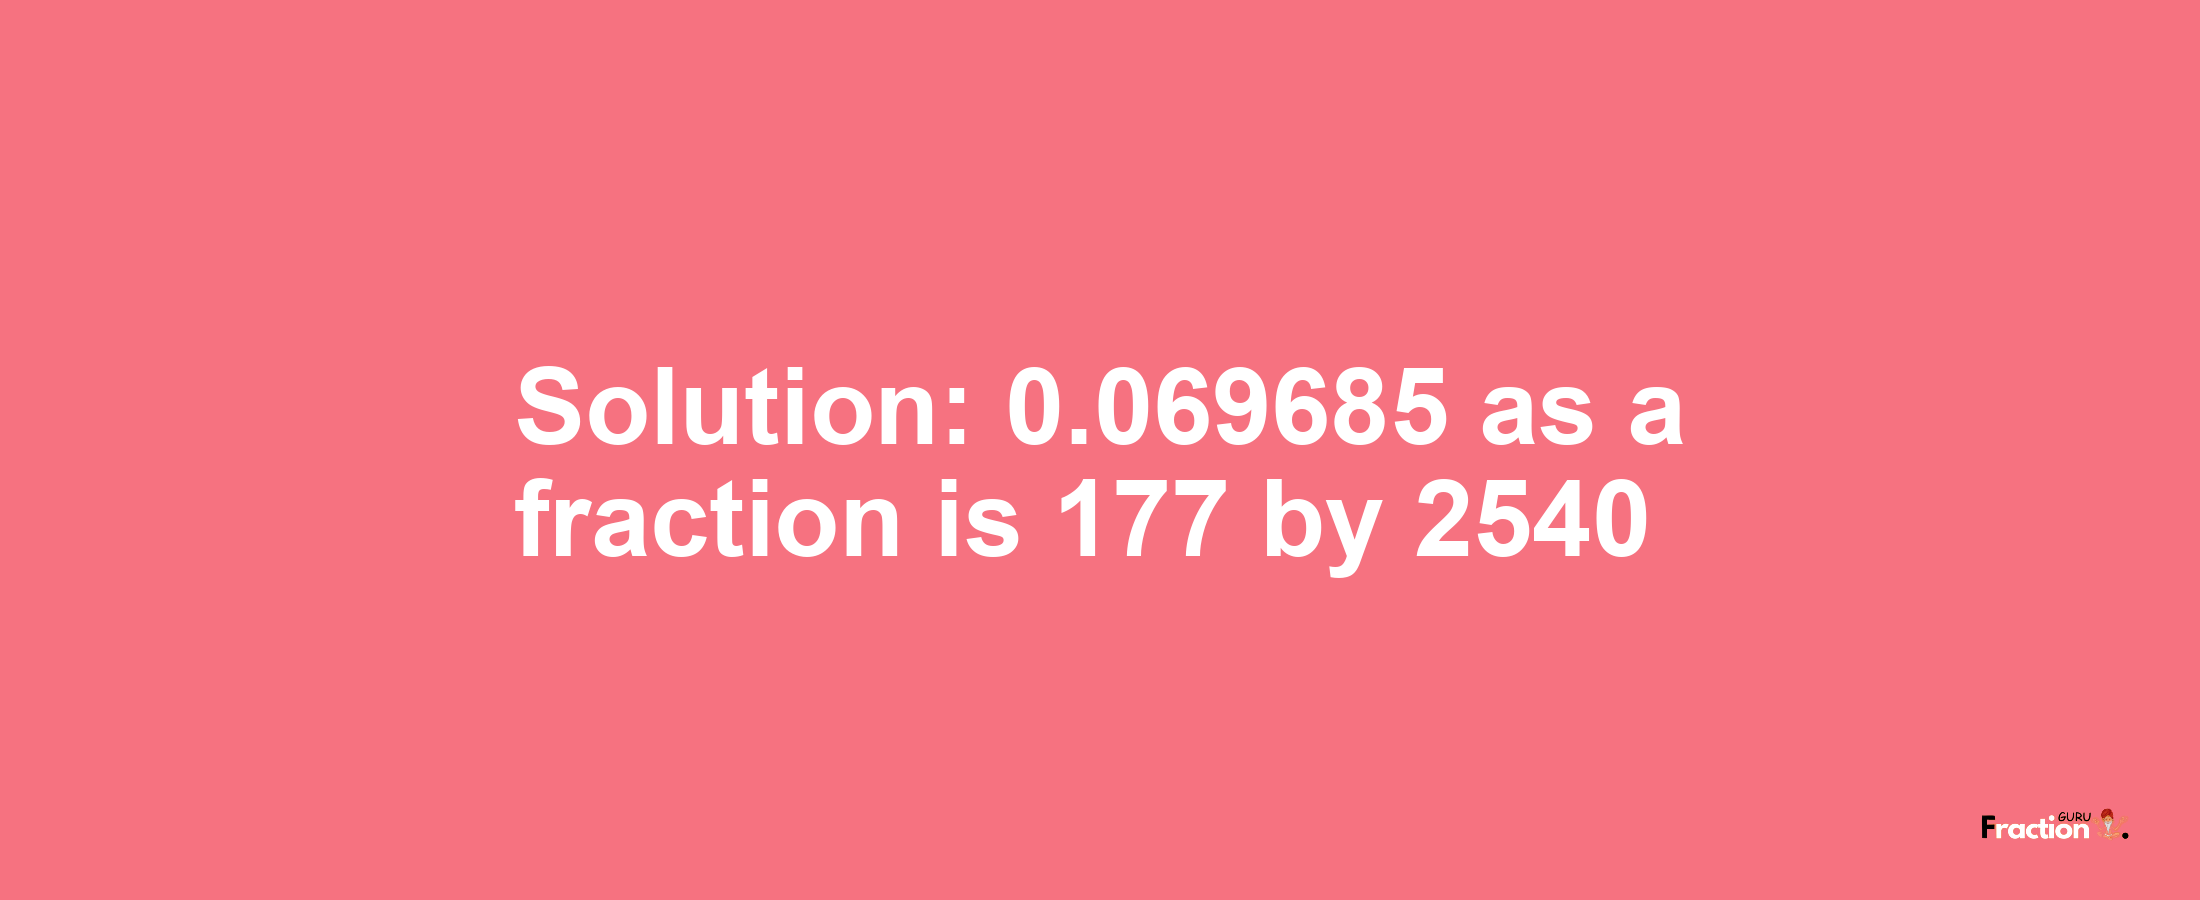 Solution:0.069685 as a fraction is 177/2540